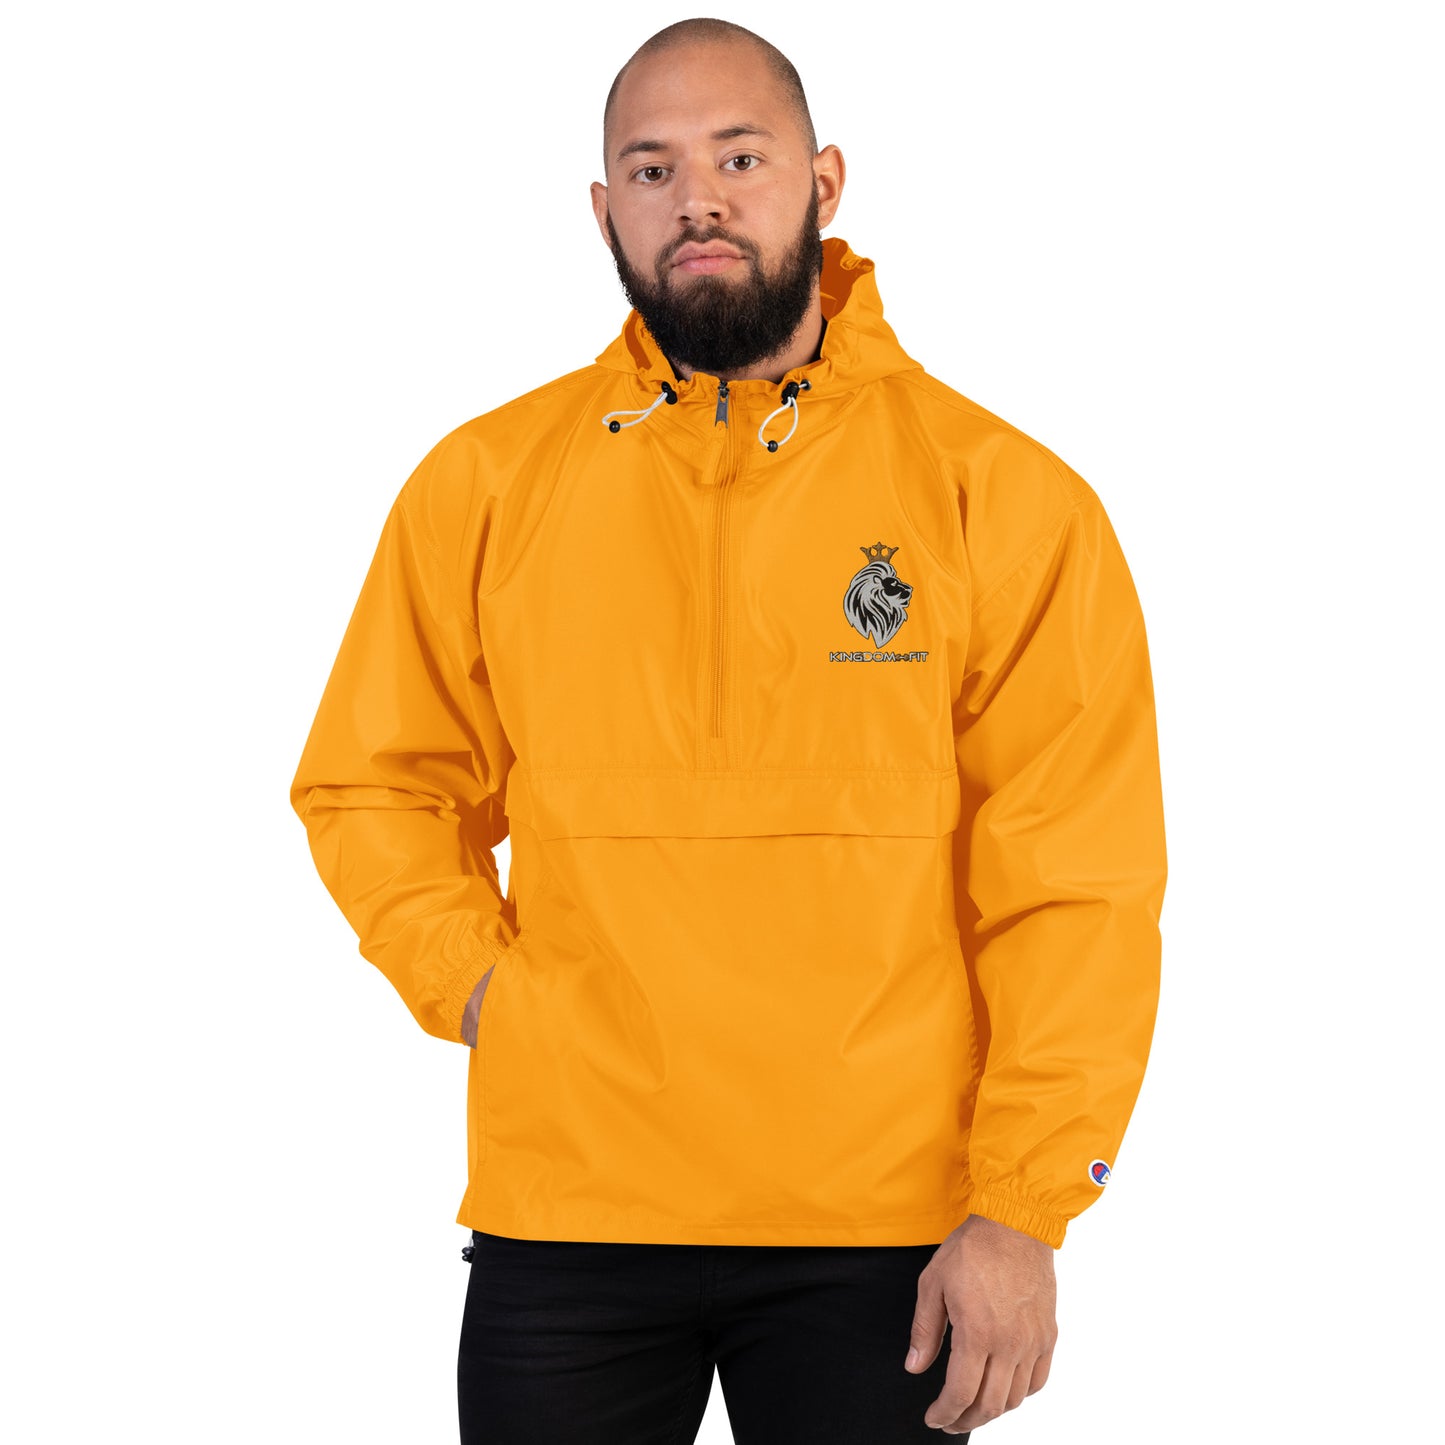 Kingdom FIT Embroidered Champion Packable Jacket